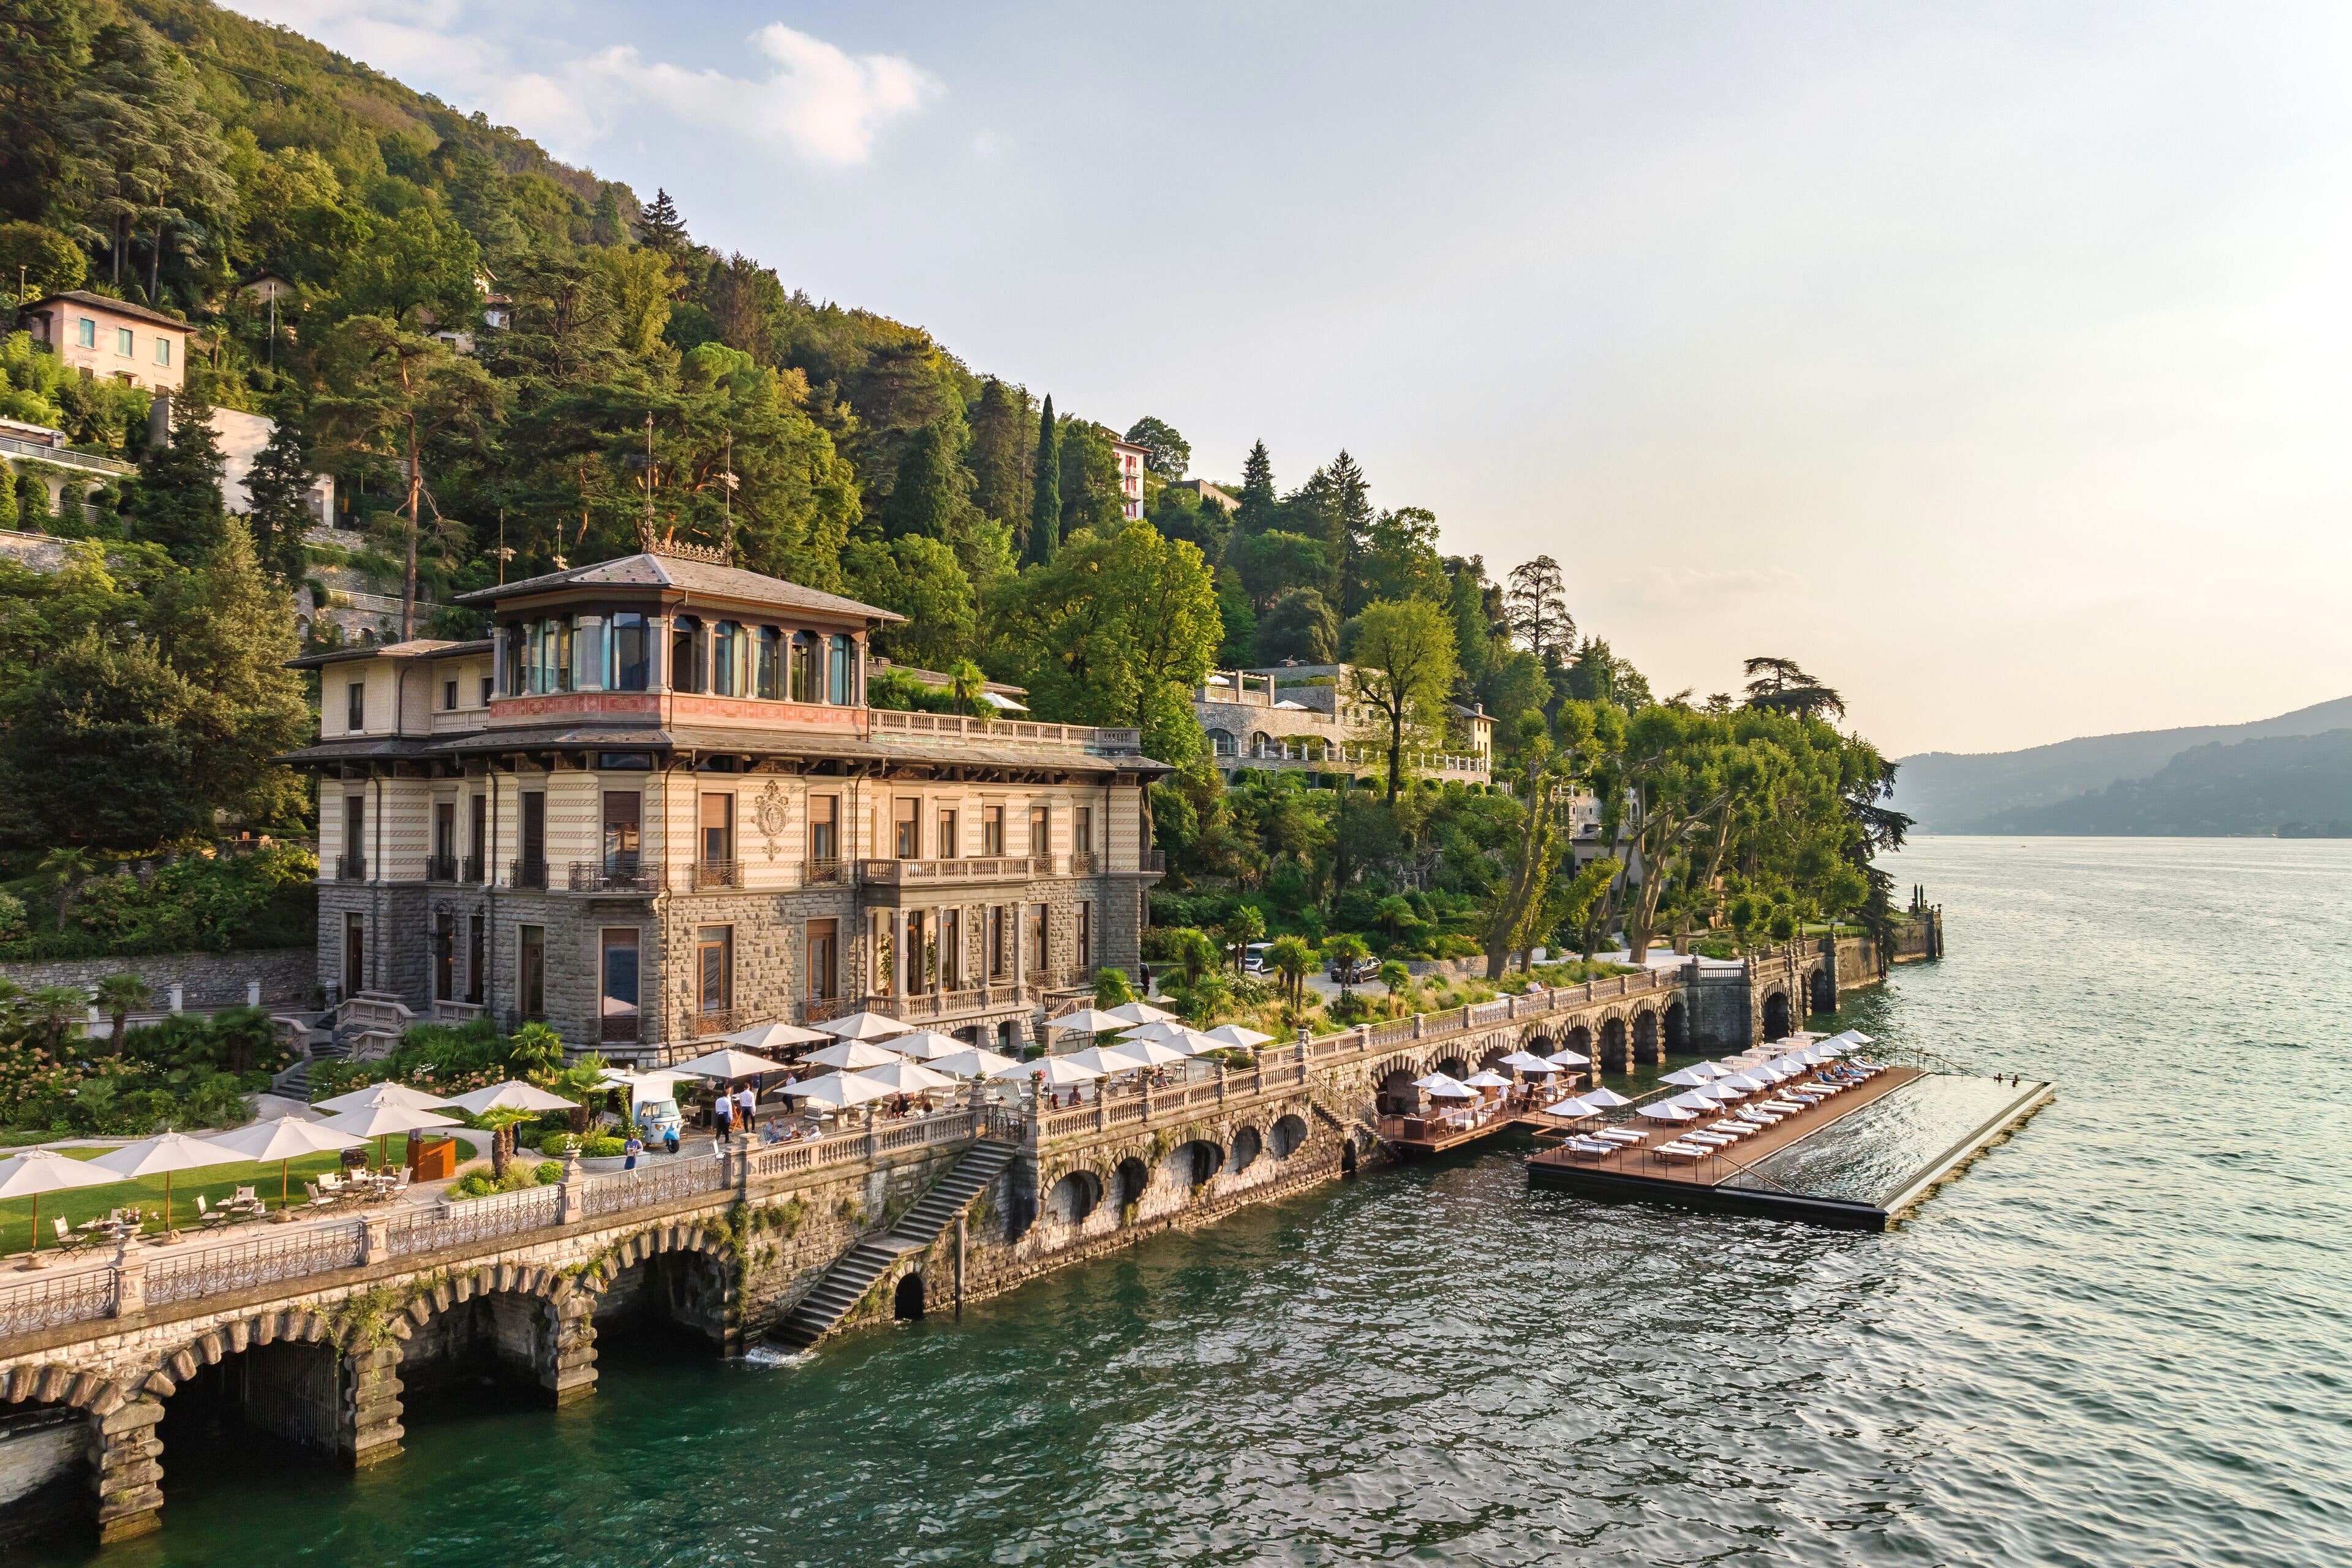 <p>Lake Como is by no means an underrated travel destination, but the classics are classics for a reason. This 56-square-mile Lombardy jewel has been attracting summer vacationers since ancient Roman times with its natural beauty, and, more recently, its storied hotels and villas that are <em>almost</em> too luxurious to handle. Book a night or two at the still-buzzy <a href="https://www.cntraveler.com/hotels/lago-di-como/mandarin-oriental-lago-di-como?mbid=synd_msn_rss&utm_source=msn&utm_medium=syndication">Mandarin Oriental Lago di Como</a>, set in an exquisitely refurbished 18th-century estate with epic gardens and old-school cocktails, or opt for a <a href="https://www.cntraveler.com/gallery/best-villas-in-lake-como?mbid=synd_msn_rss&utm_source=msn&utm_medium=syndication">private villa rental</a> that will set you back a few paychecks (but is still totally worth it).</p> <p>June is not only the best time to experience the area’s perfect weather before the A-list crowds descend, but it’s also when travelers can experience the <a href="https://mylakecomo.co/en/events/festival-of-san-giovanni/">Festival of San Giovanni</a>—arguably the most famous and exciting event the lake sees all year. Held from June 22-23 this year, the annual festival commemorates the Roman Empire’s invasion of Isola Comacina (the lake’s sole island) in the 12th century, evoking the siege’s devastating fire with luminaries and spectacular fireworks. (And of course, Lake Como isn't gorgeous just in summer—try planning a visit for <a href="https://www.cntraveler.com/story/lake-como-off-season?mbid=synd_msn_rss&utm_source=msn&utm_medium=syndication">the off-season</a> too.)</p><p>Sign up to receive the latest news, expert tips, and inspiration on all things travel</p><a href="https://www.cntraveler.com/newsletter/the-daily?sourceCode=msnsend">Inspire Me</a>